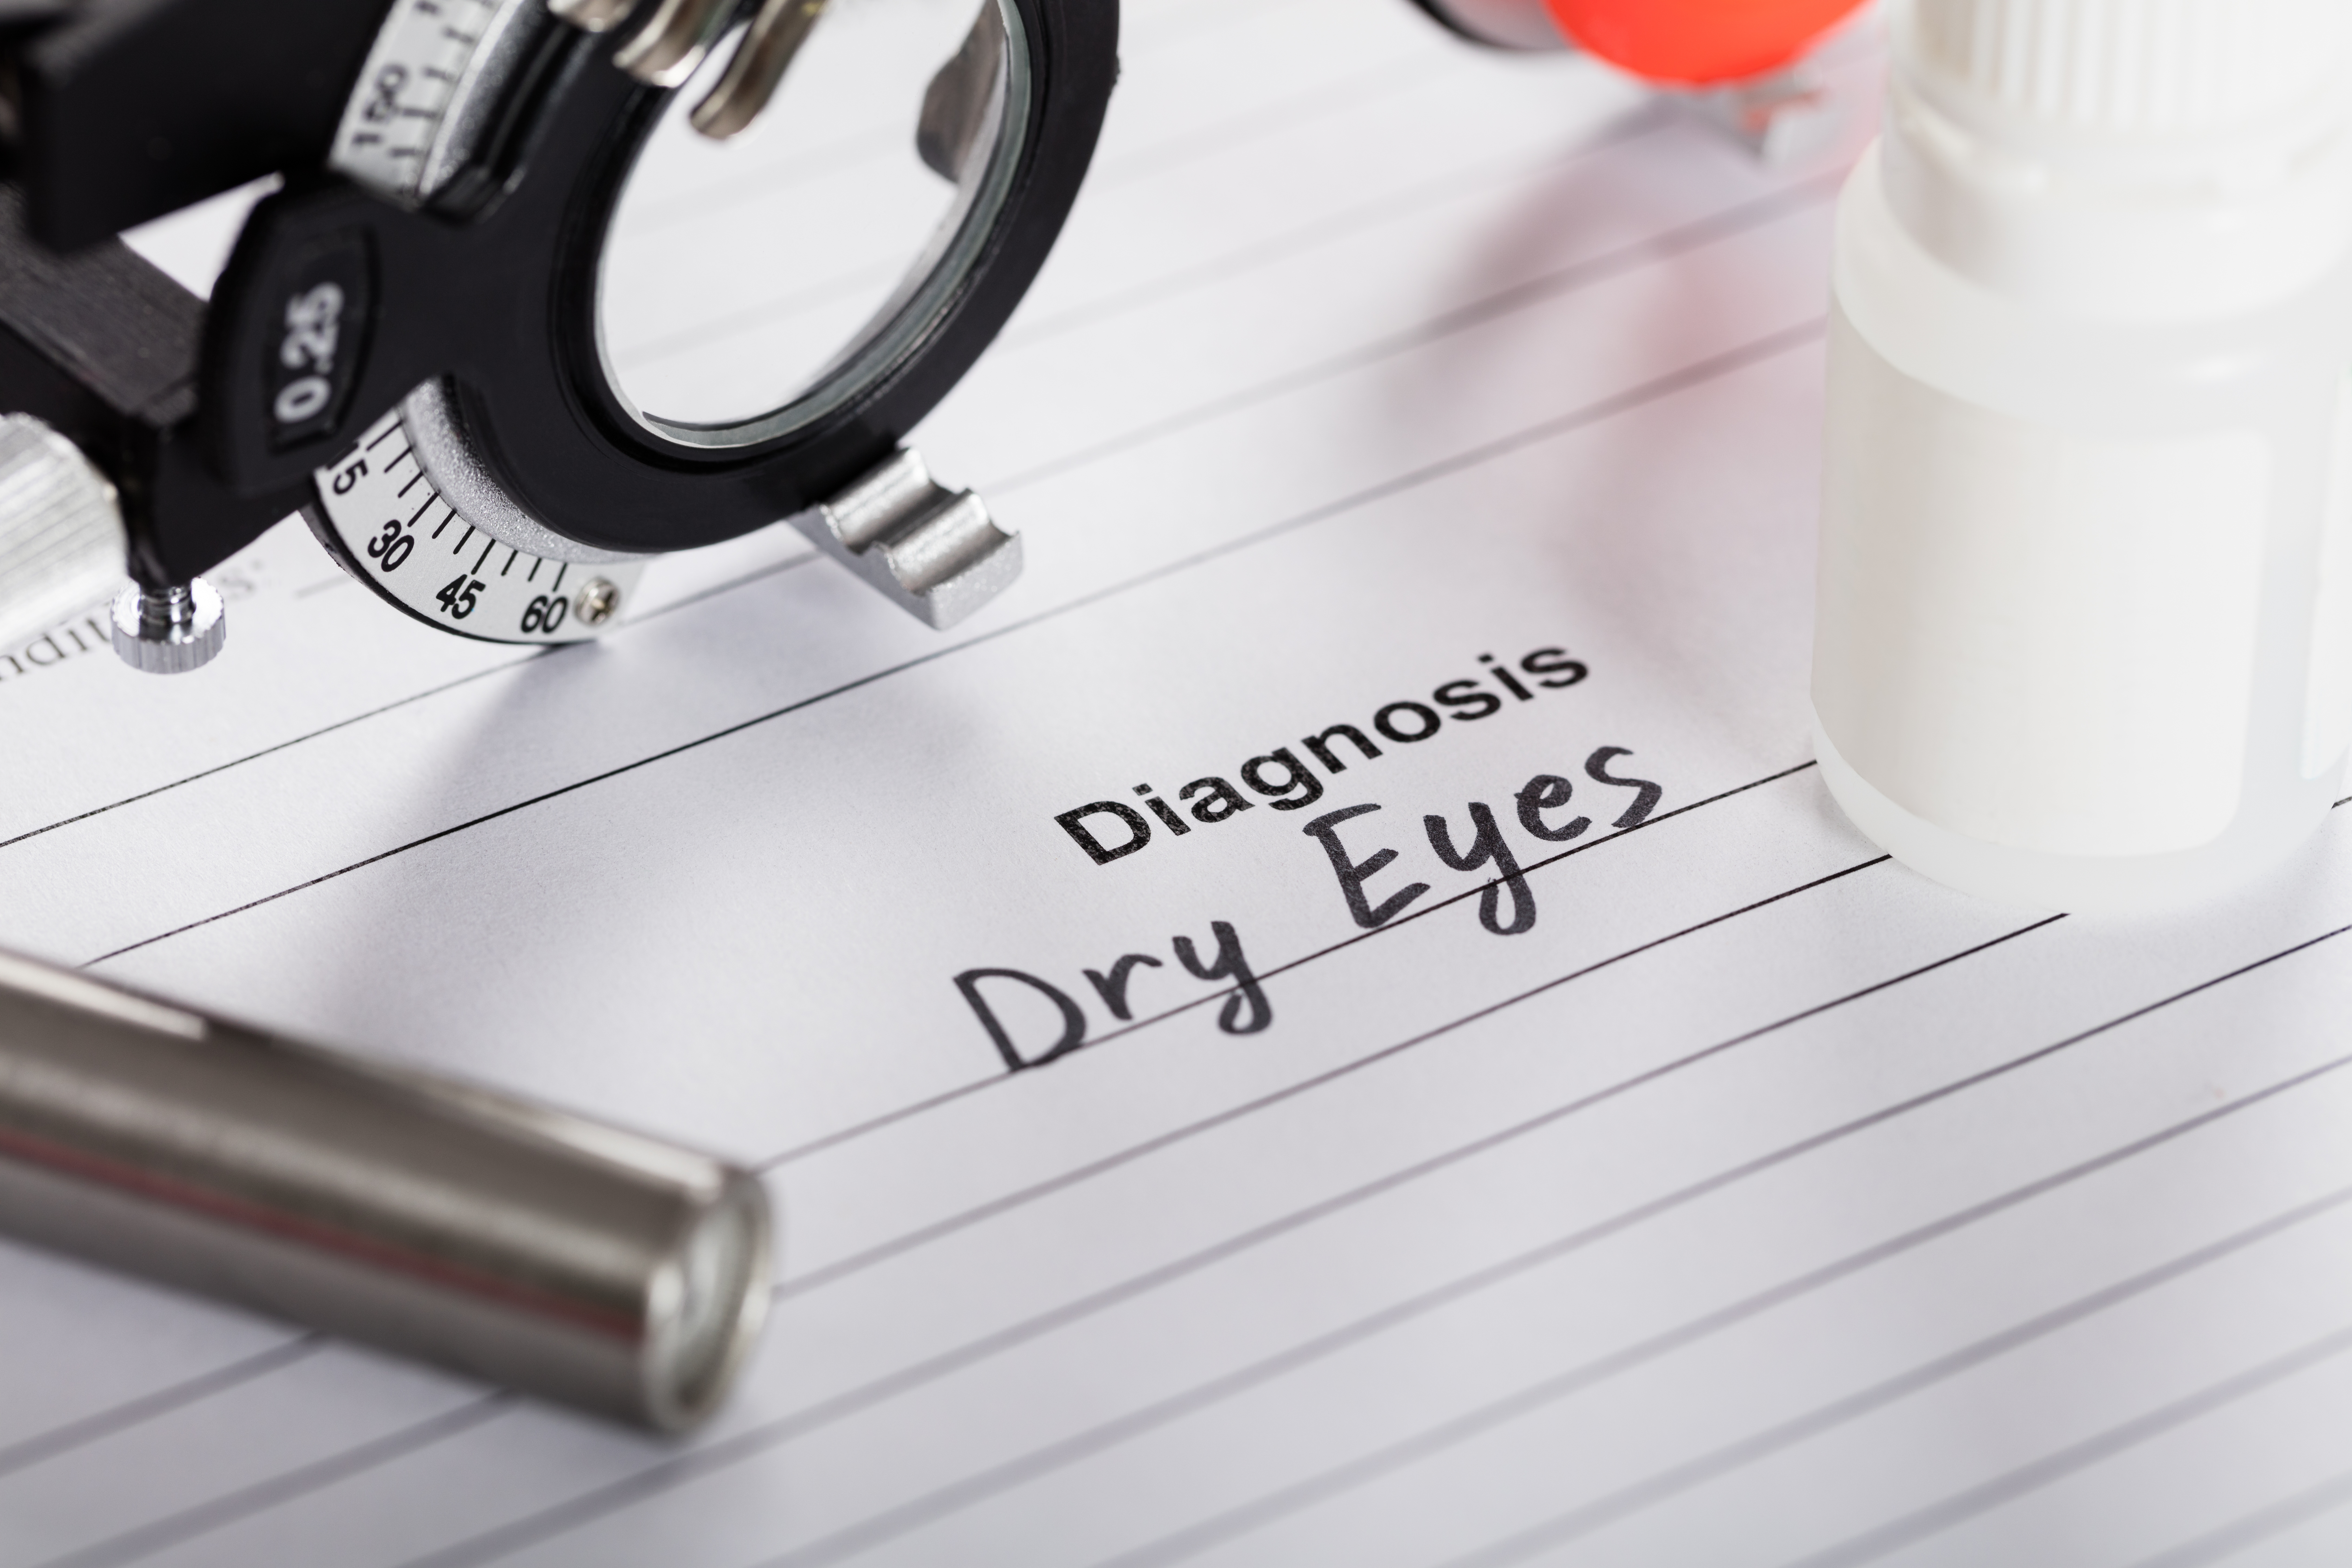 Diagnosis of dry eyes